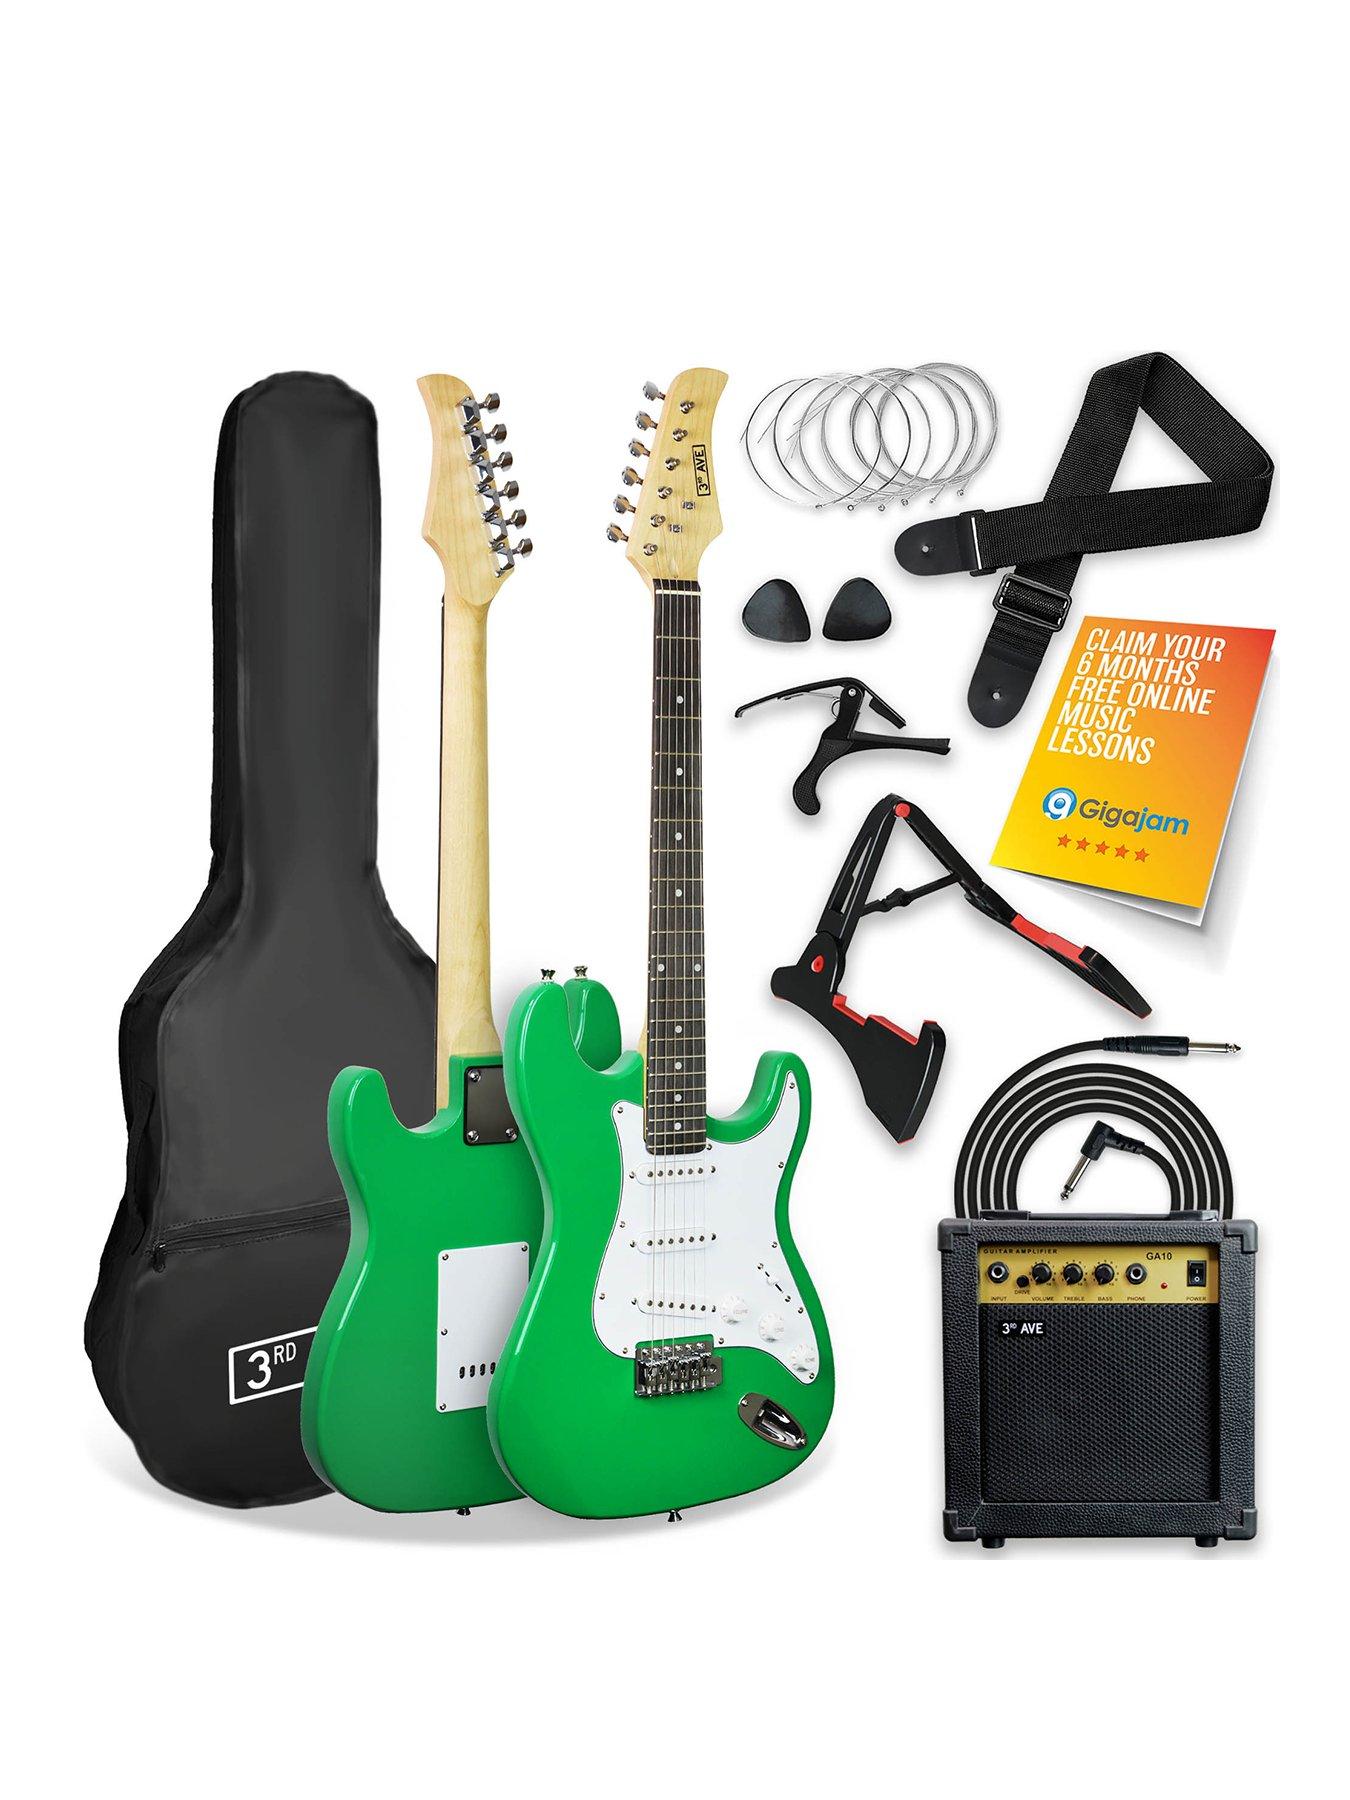 Full Size Bass Guitar Ultimate Kit with 15W Amp - 6 Months FREE